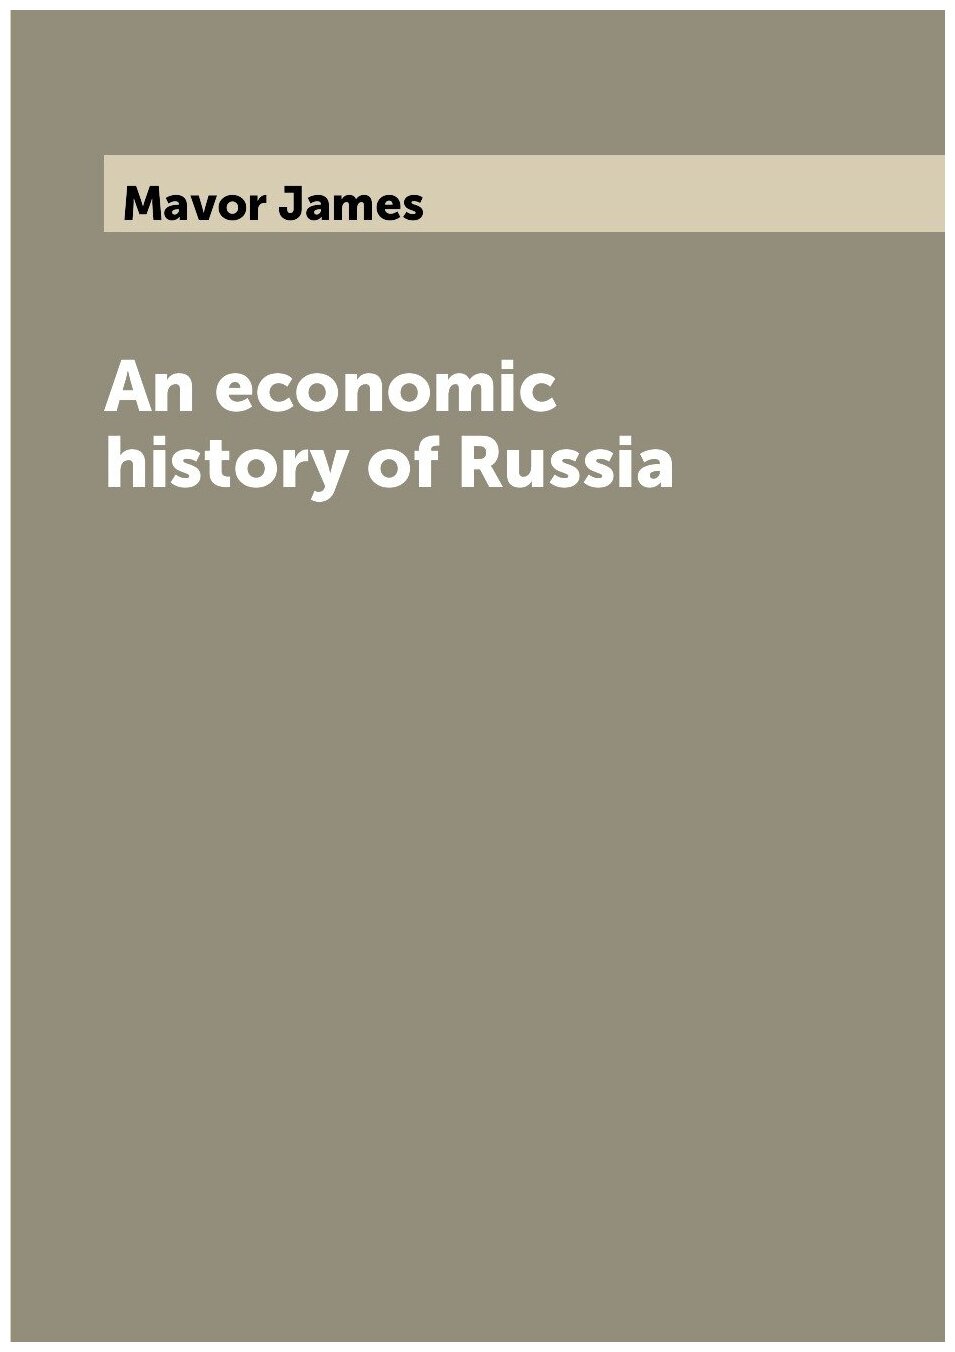 An economic history of Russia